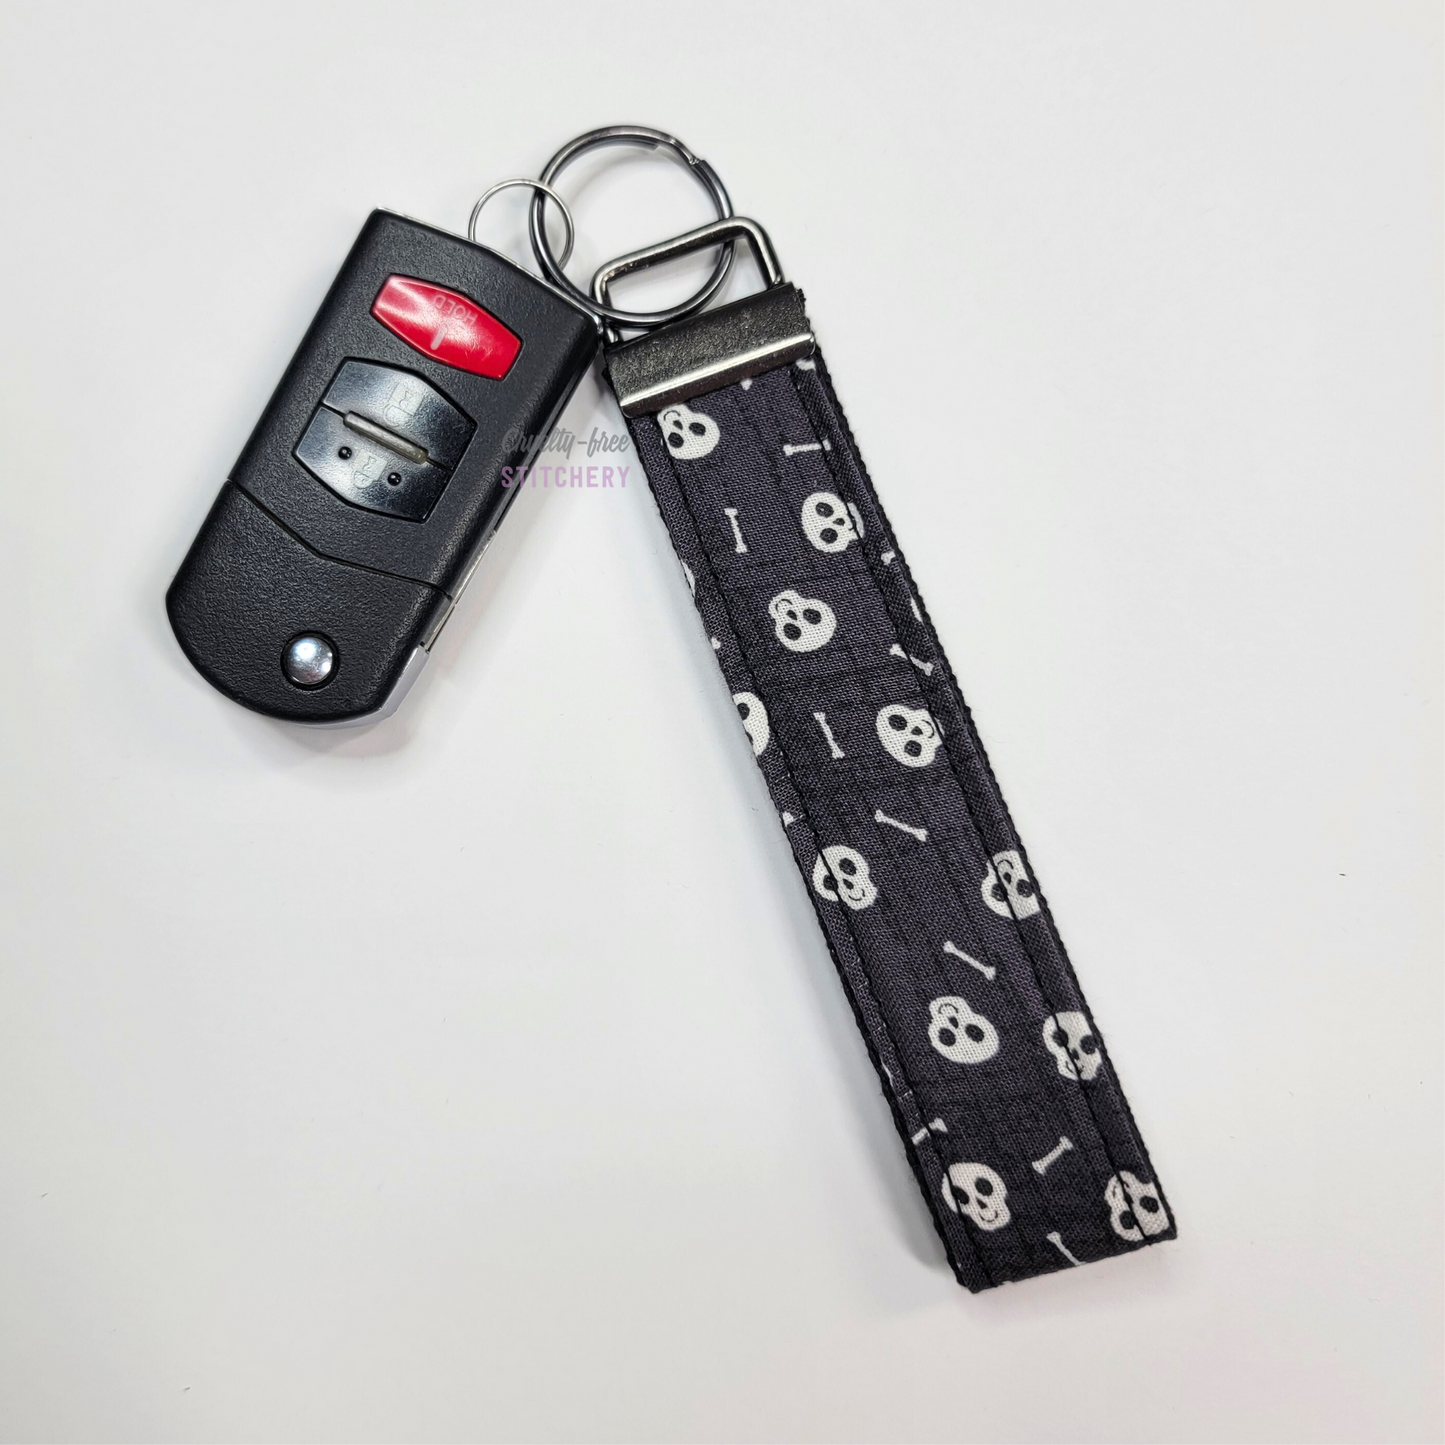 Skull print key fob wristlet attached to a car key for scale. The car key is the fold-away type and is about half as long as the strap.